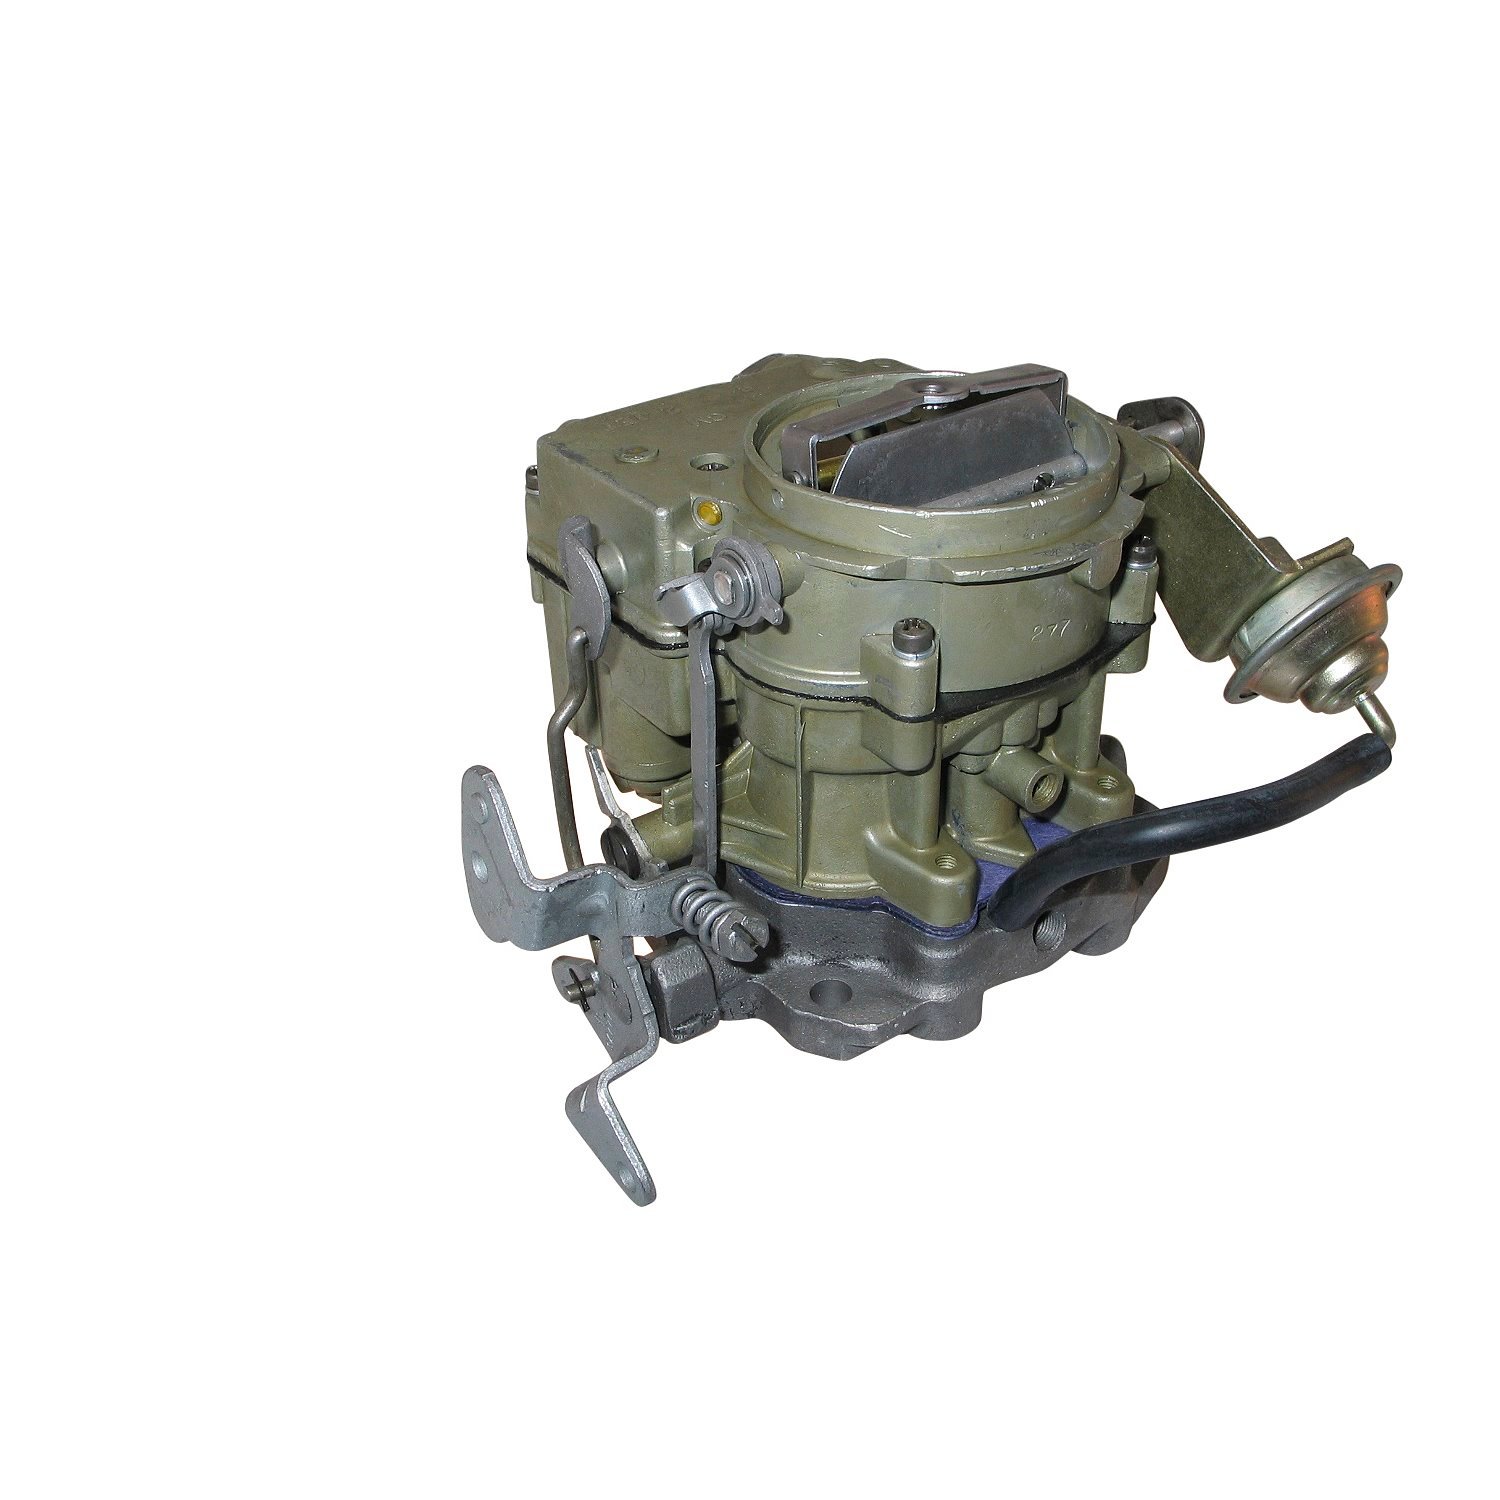 14-4146 Rochester Remanufactured Carburetor, 2GV-Style